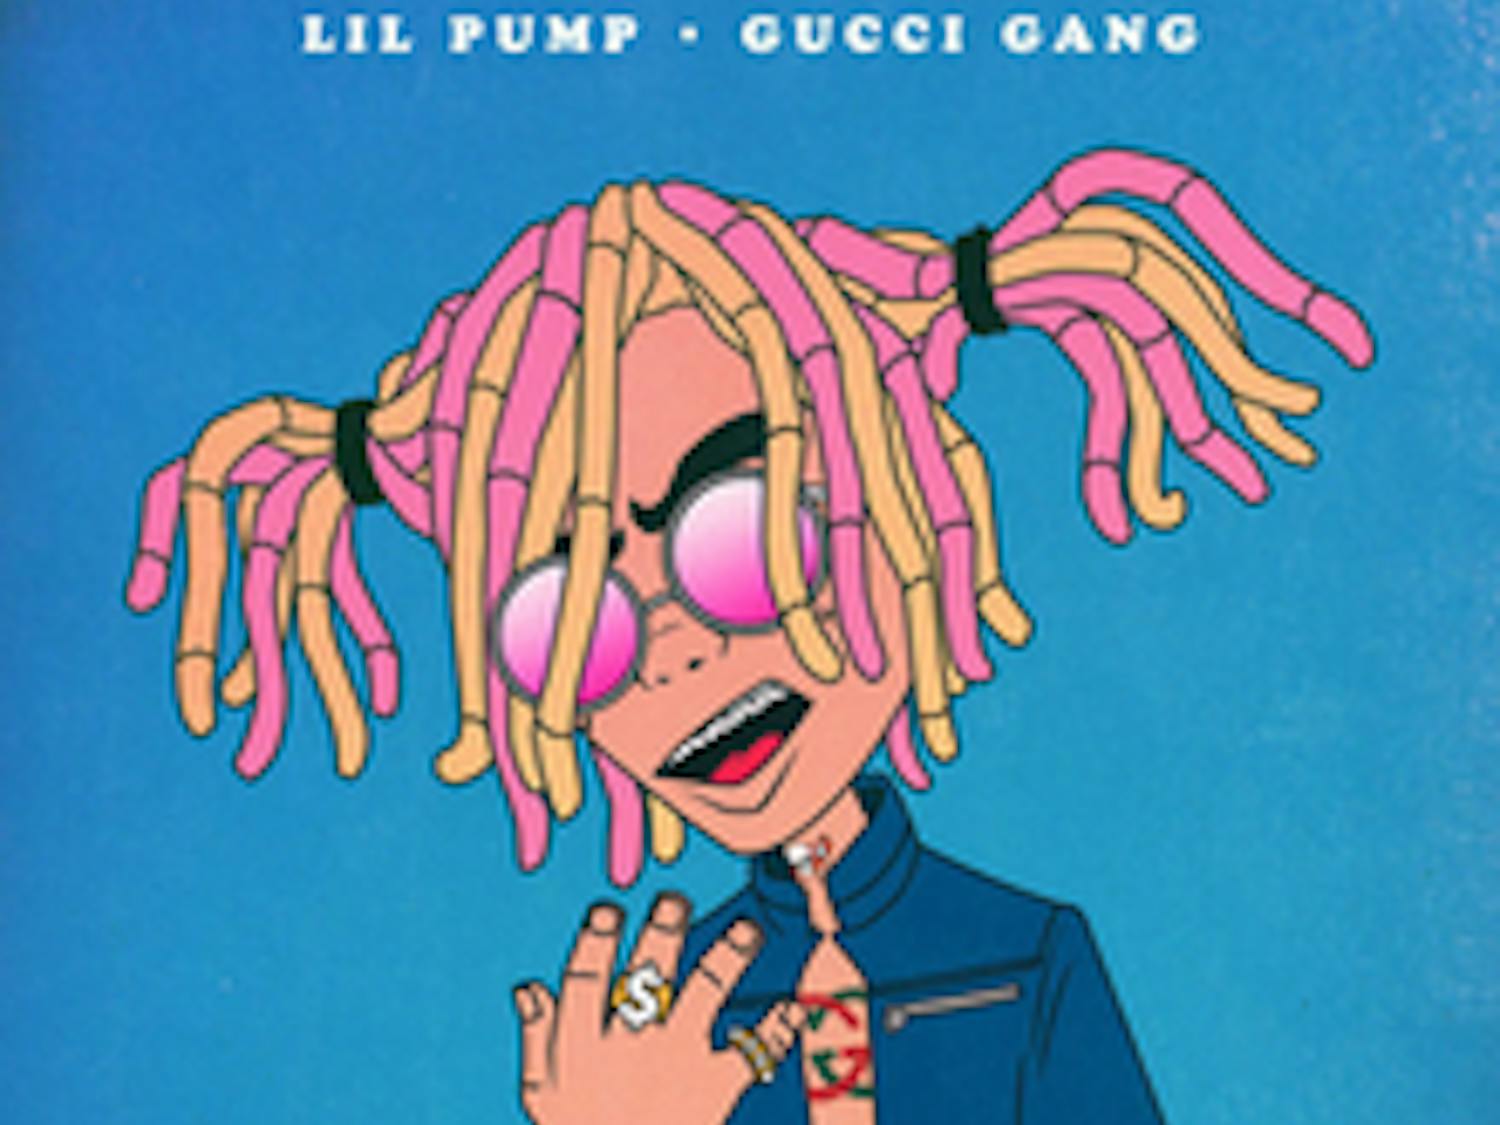 The single cover to Lil Pump's "Gucci Gang."